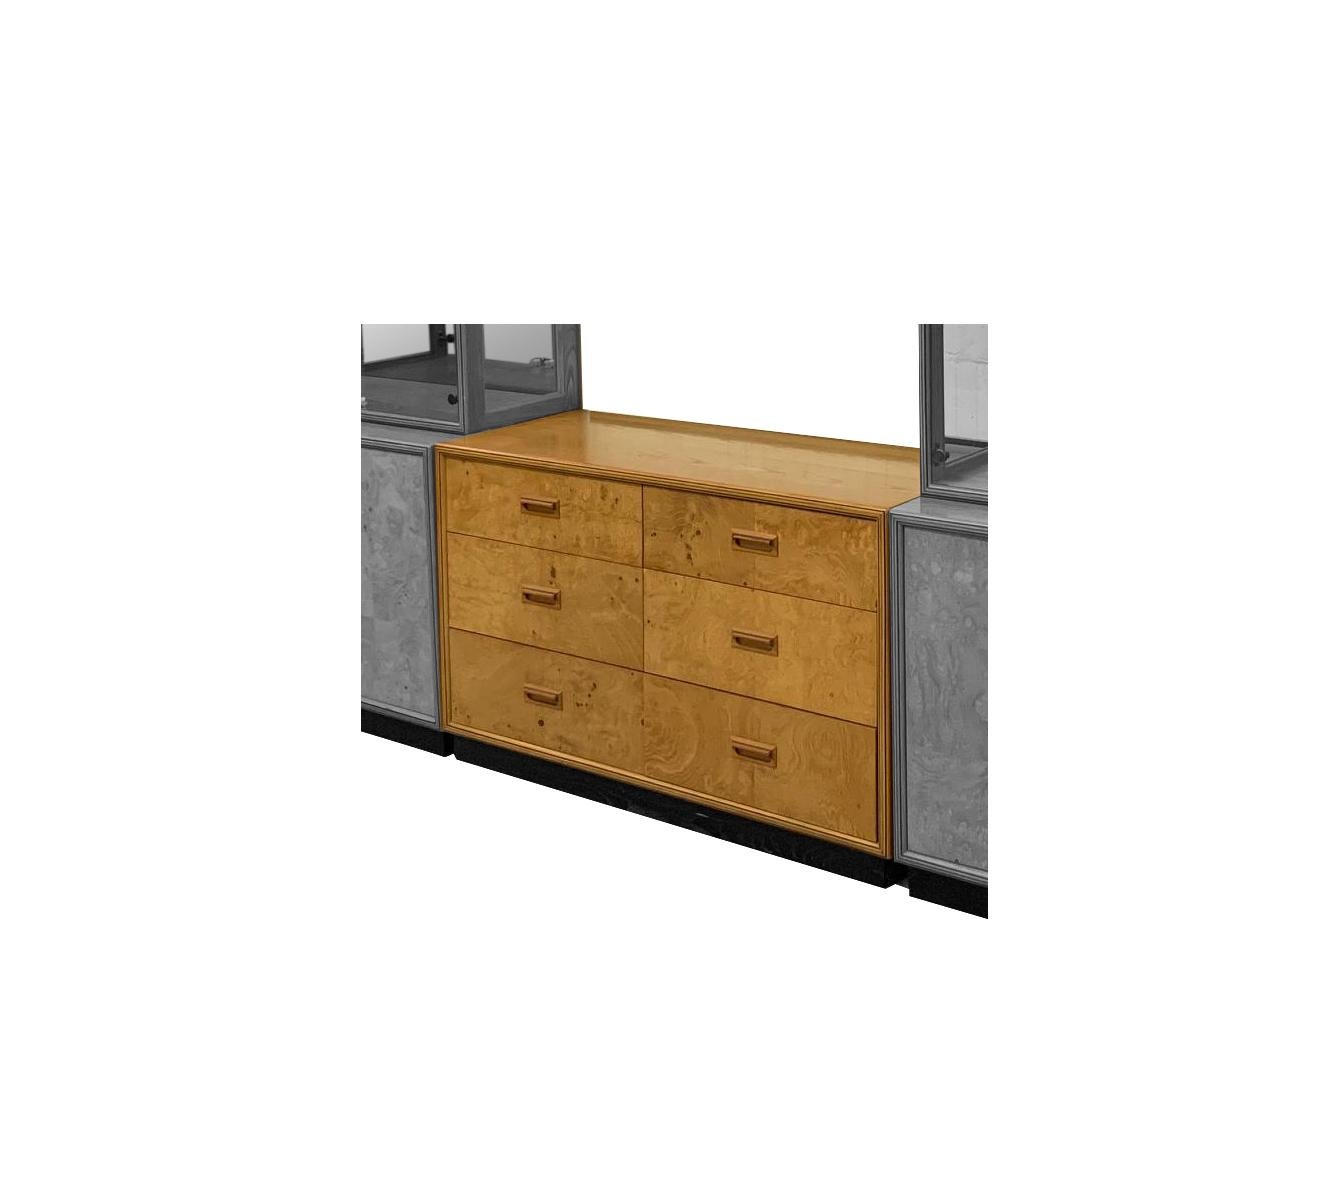 Milo Baughman style Mid-Century Modern double dresser features patch work burl wood construction, and hand inlaid pulls. From the Henredon 